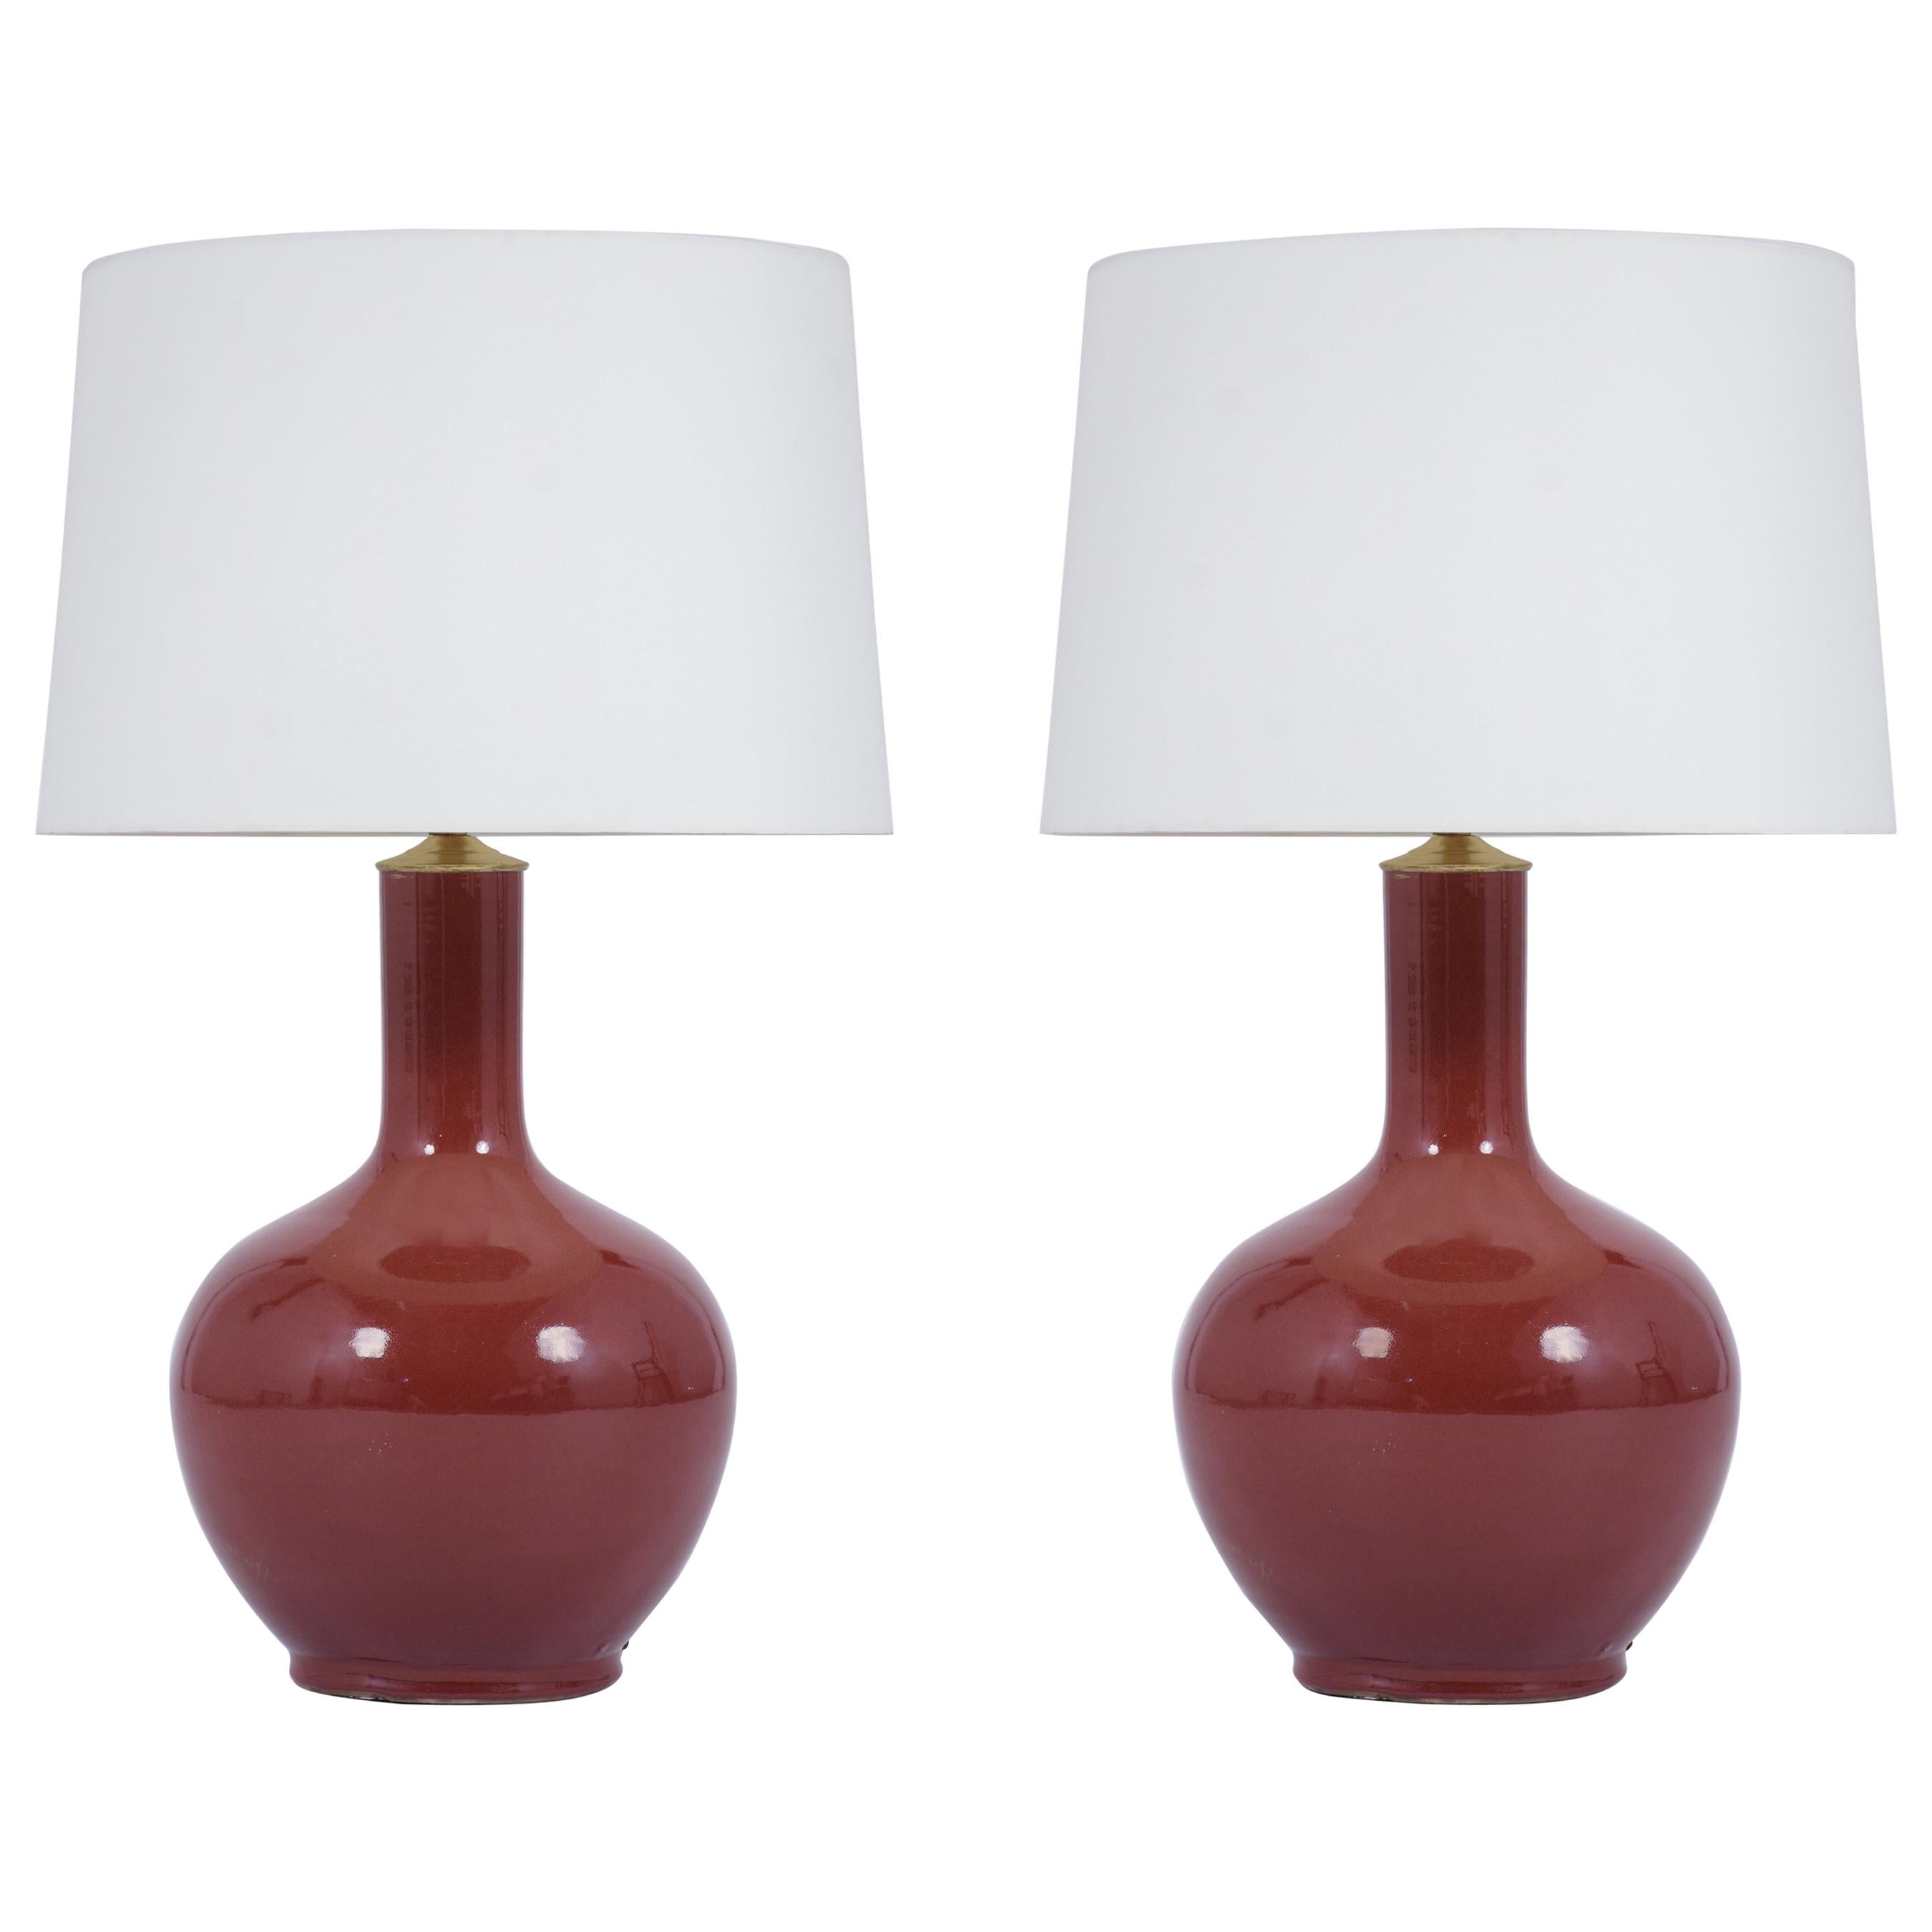 Mid Century Modern Table Lamps At 1stdibs, Red Table Lamp Bases Uk